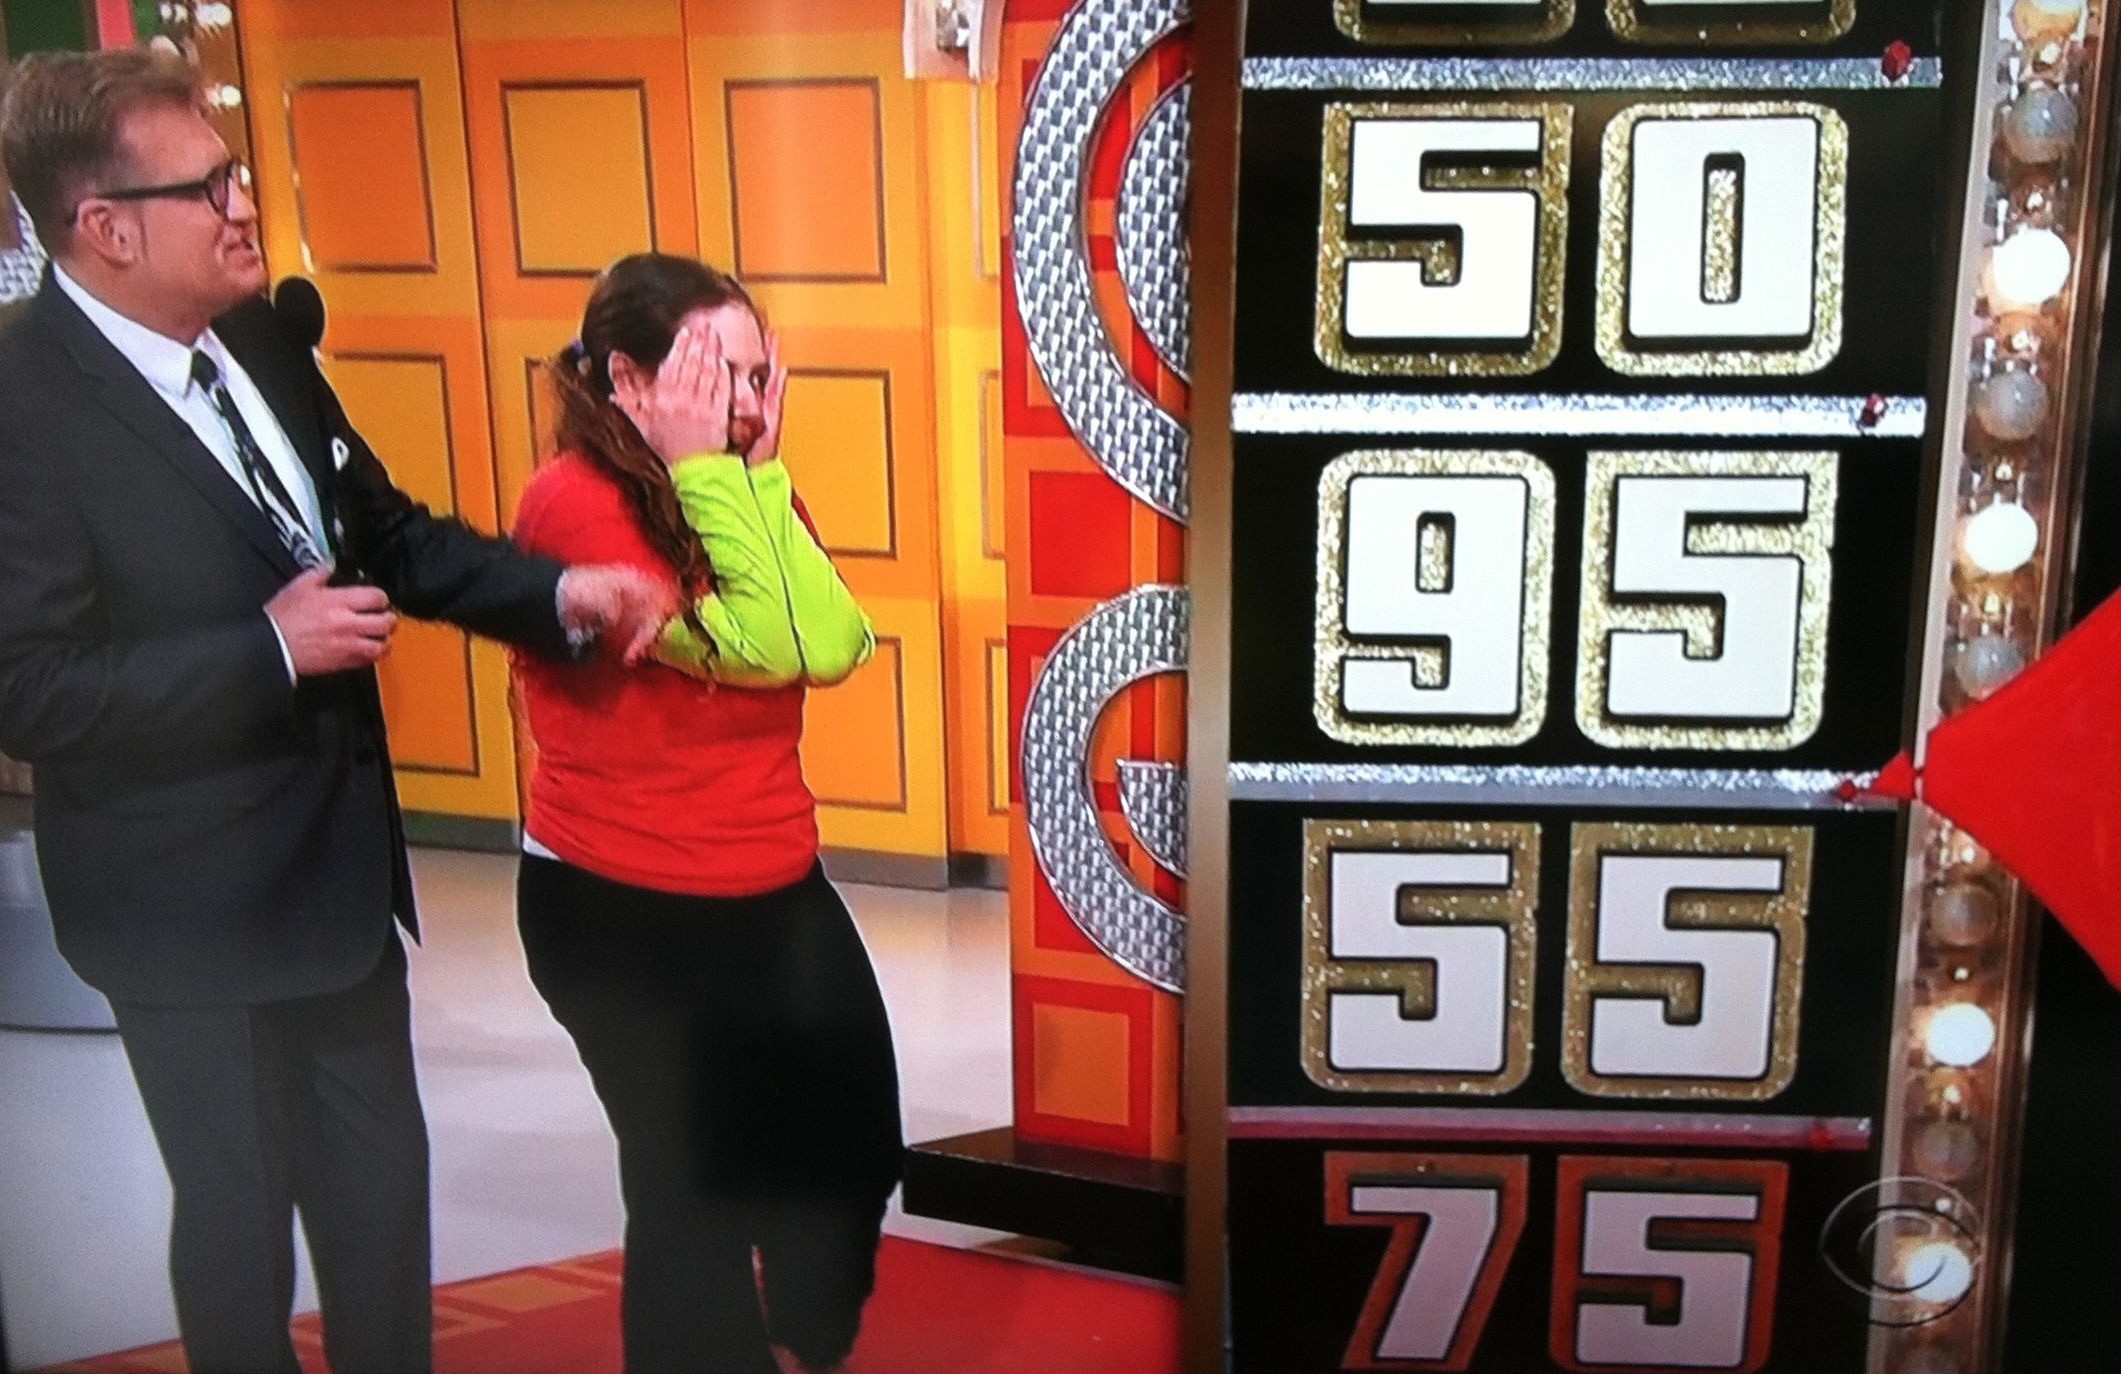 Aurora De Lucia narrowly missing 95 cents at The Price is Right wheel with Drew Carey